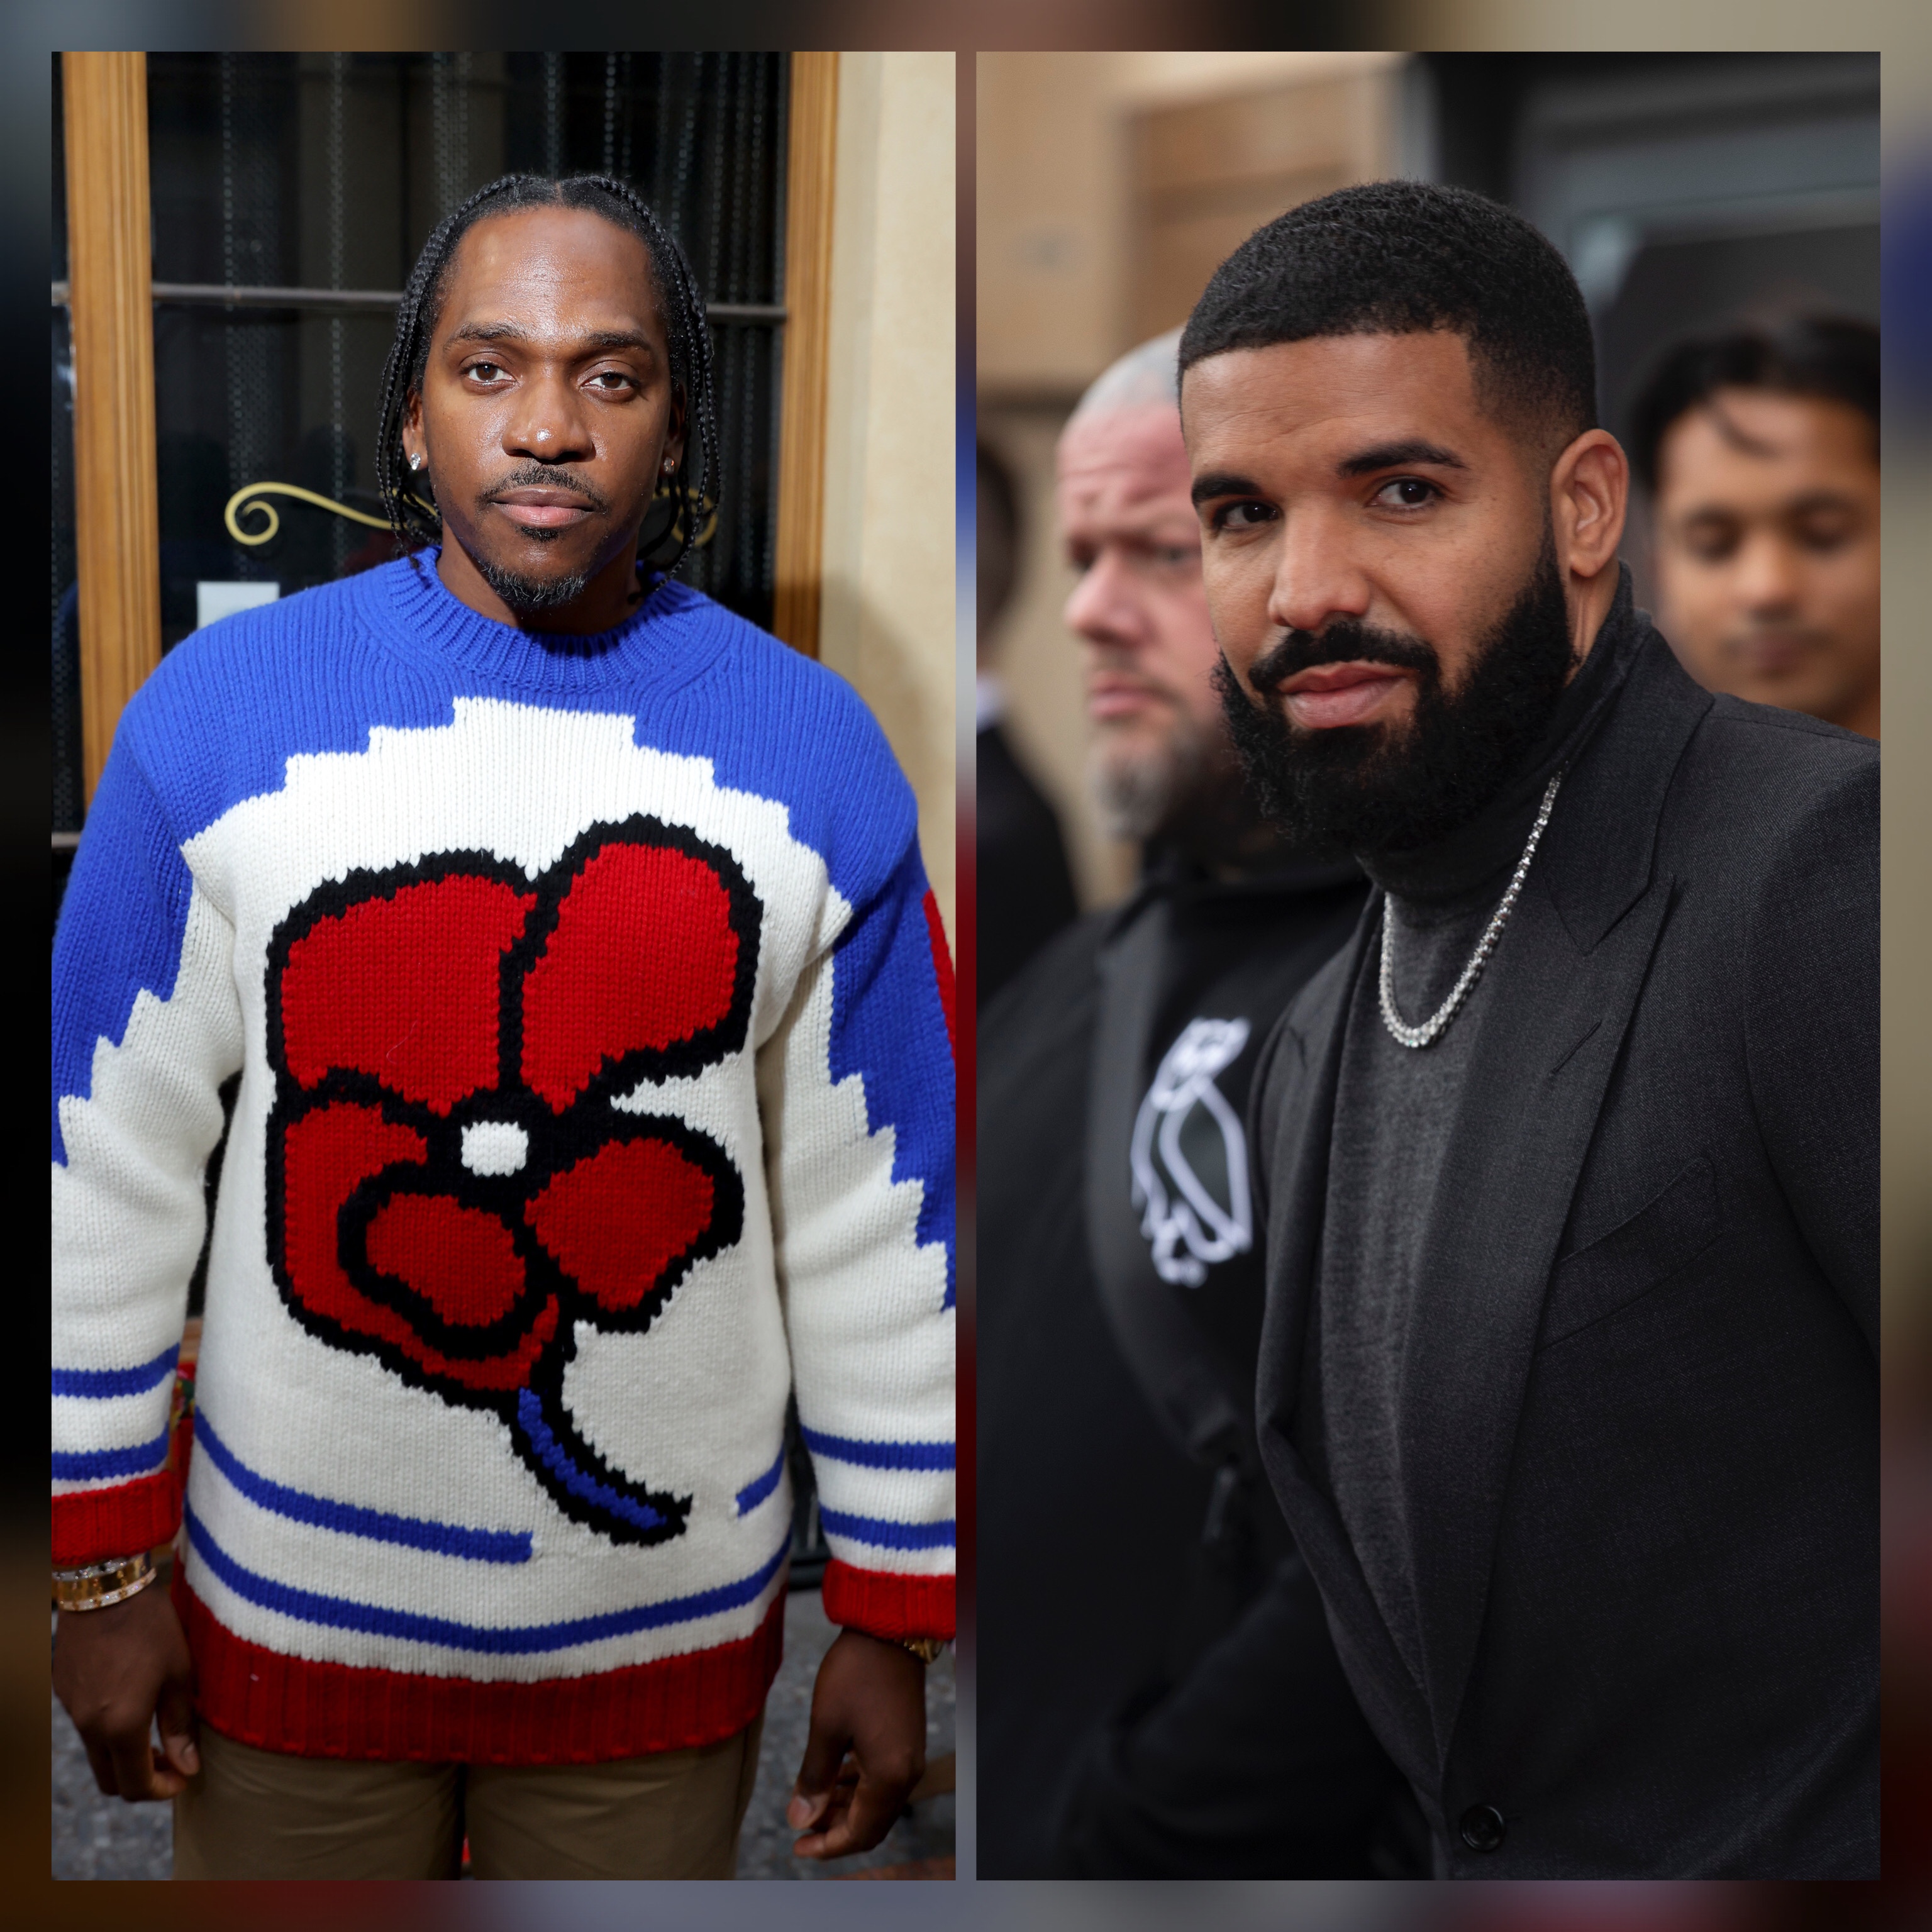 Pusha T Speaks On Where He Stands With Drake Following Kanye West And Drake's Recent Reconciliation--"Bygones Are Bygones" thumbnail